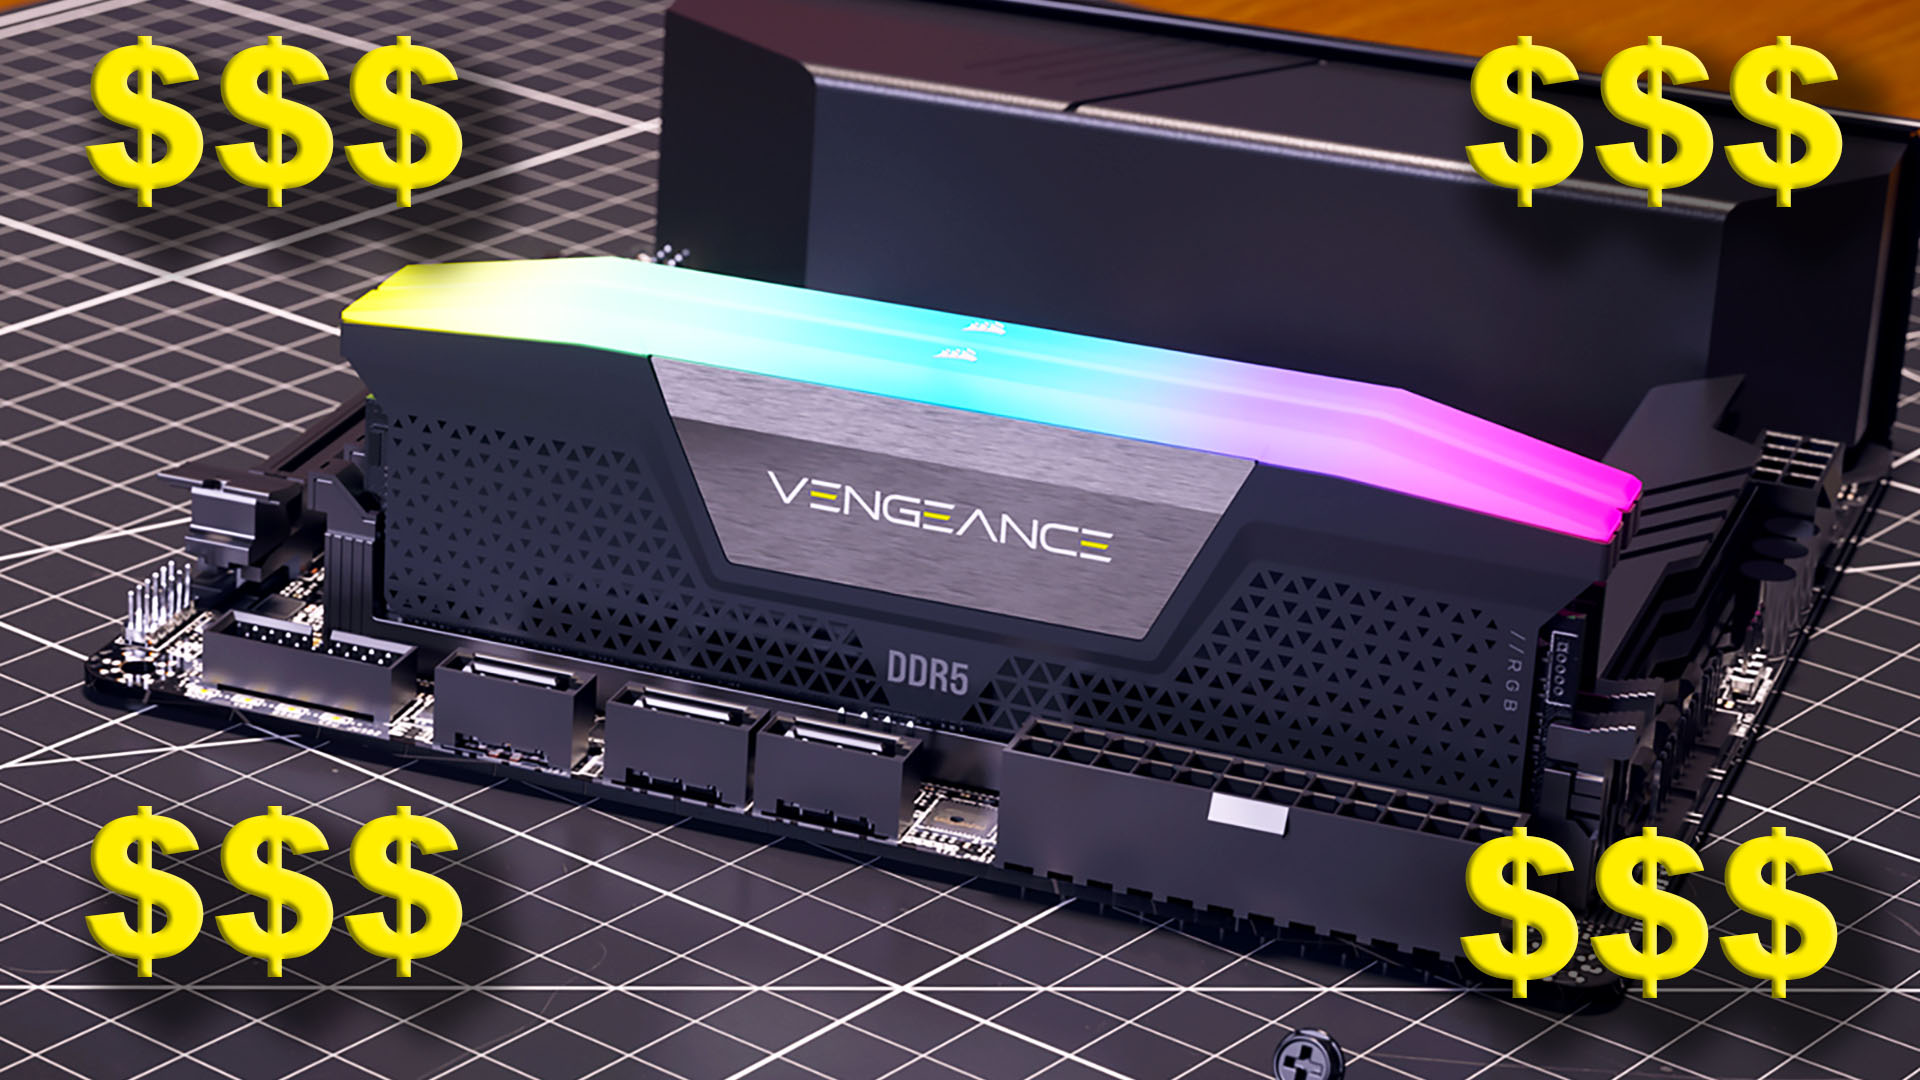 Buy your PC gaming RAM upgrade now, before prices soar